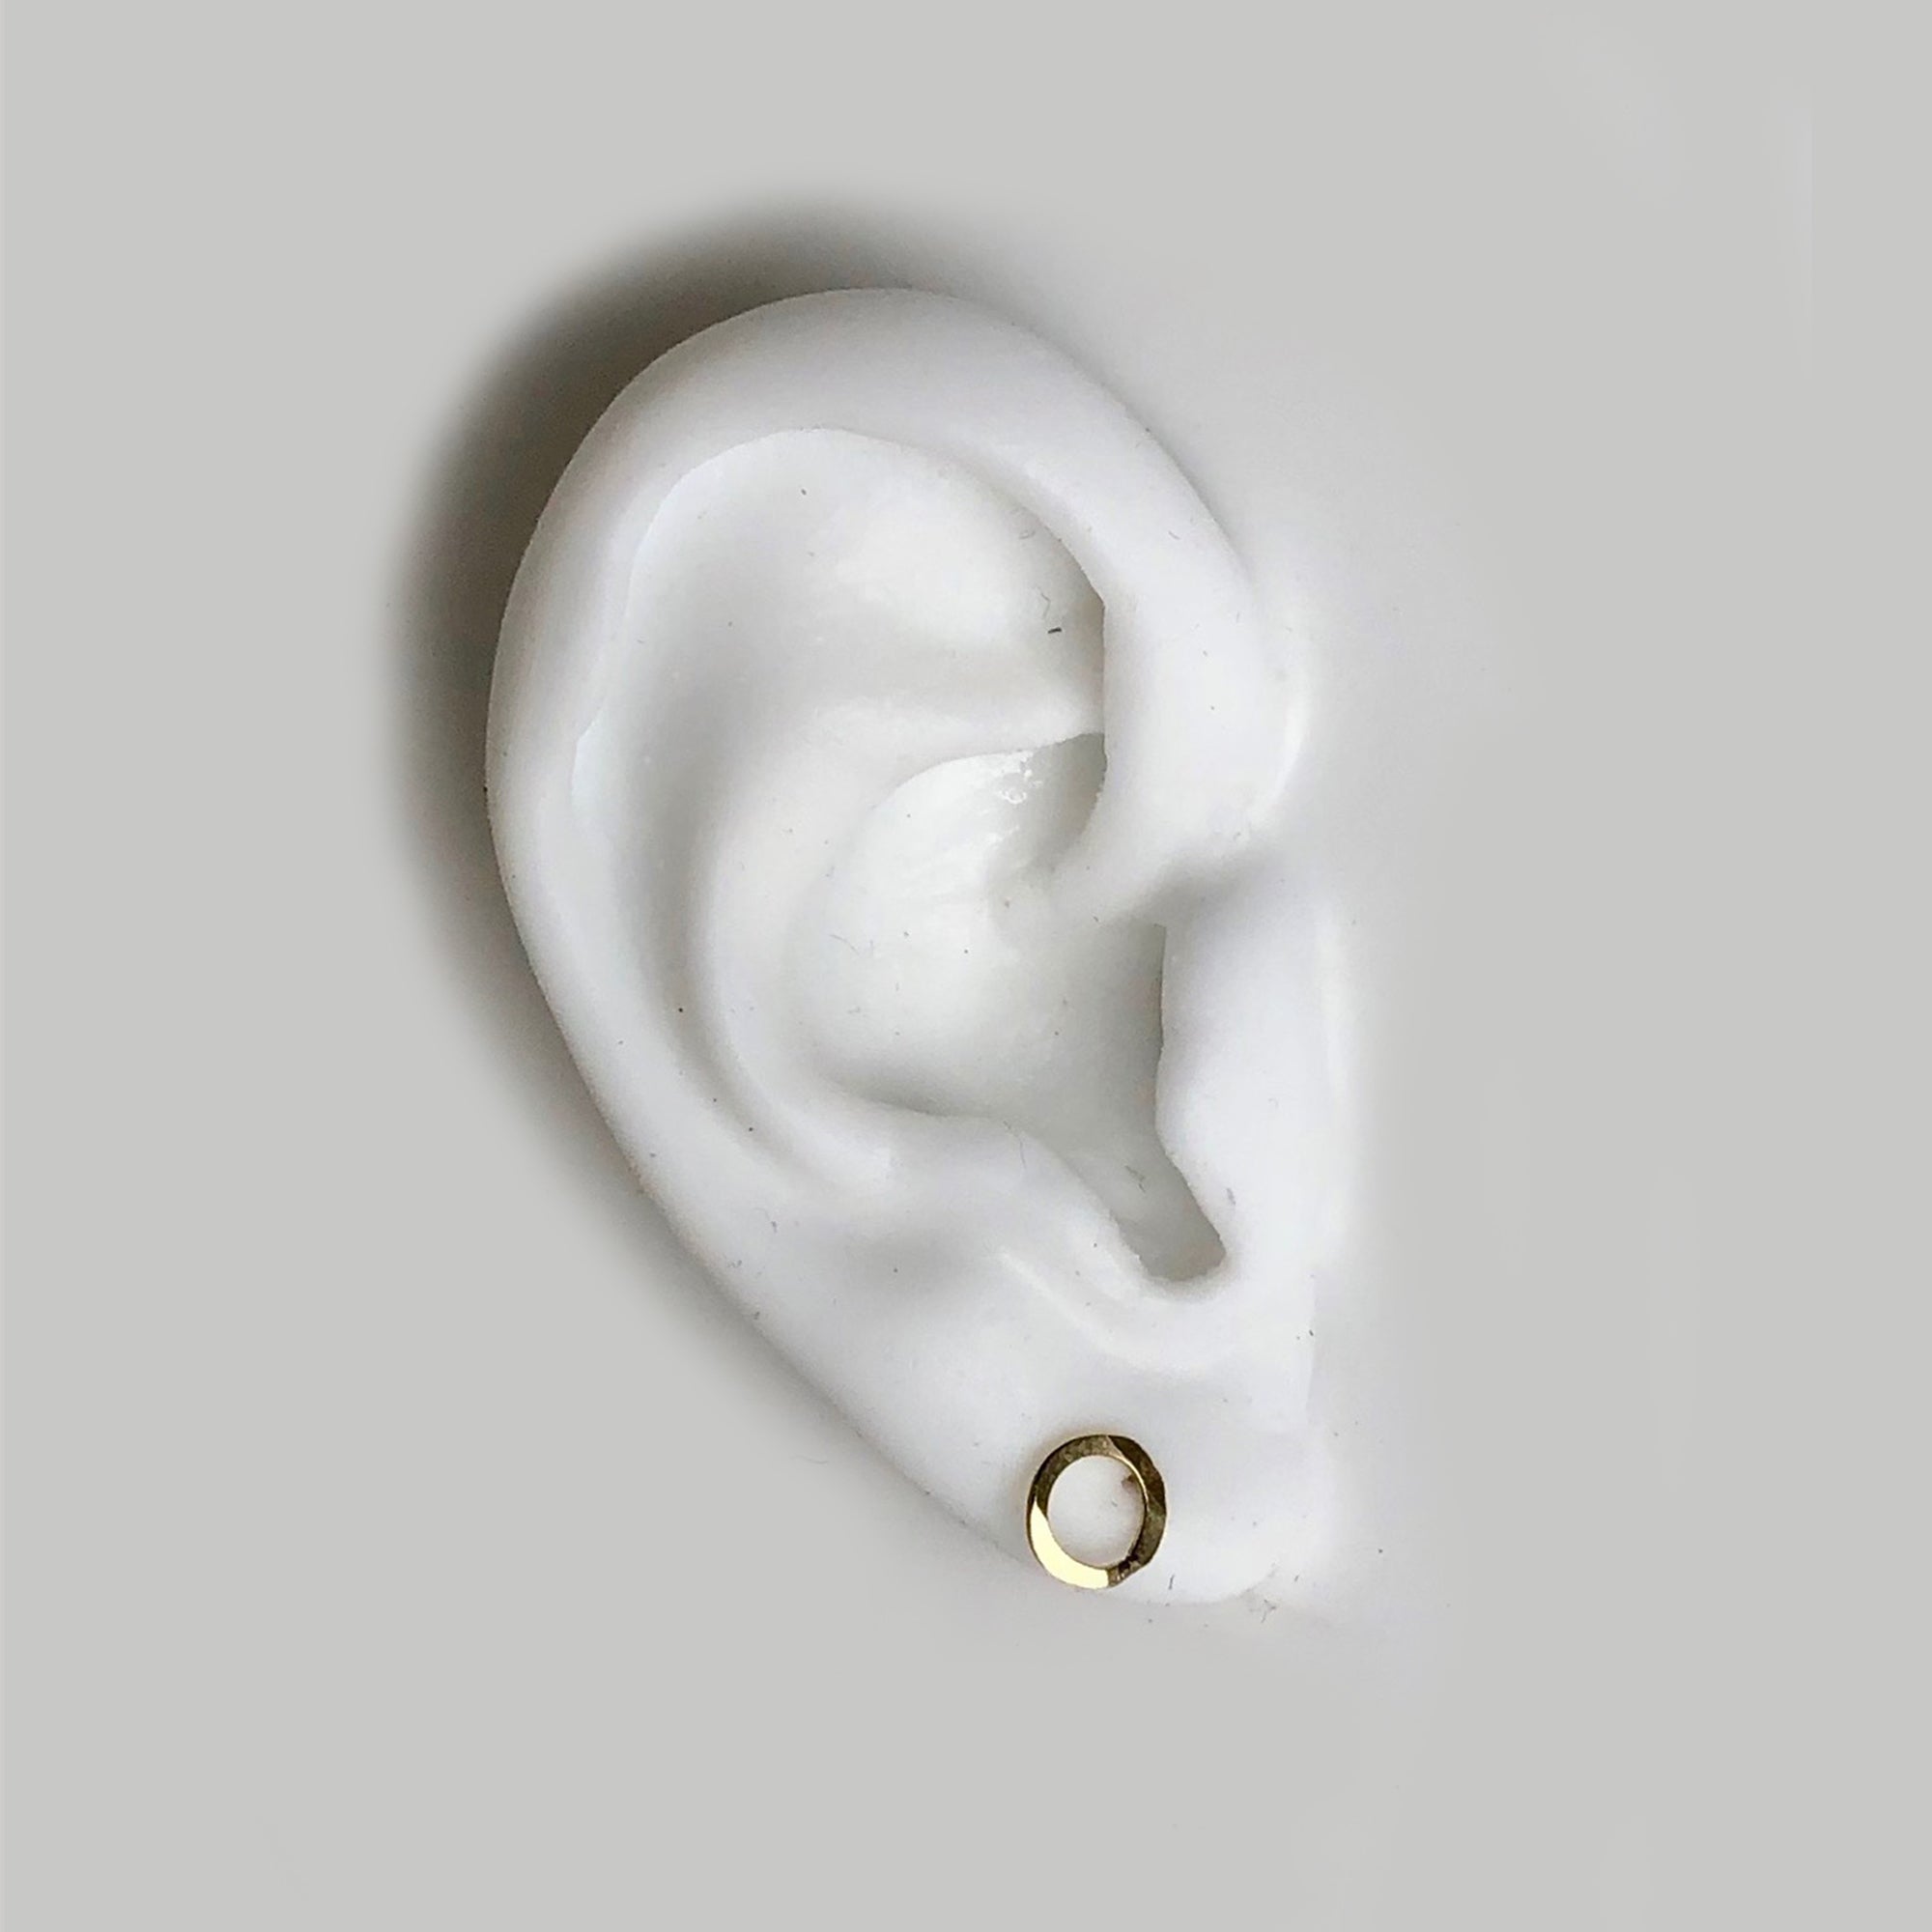 One-of-a-kind, 14k gold set features organic hand forged studs inspired by our collaboration with artist Callen Thompson 